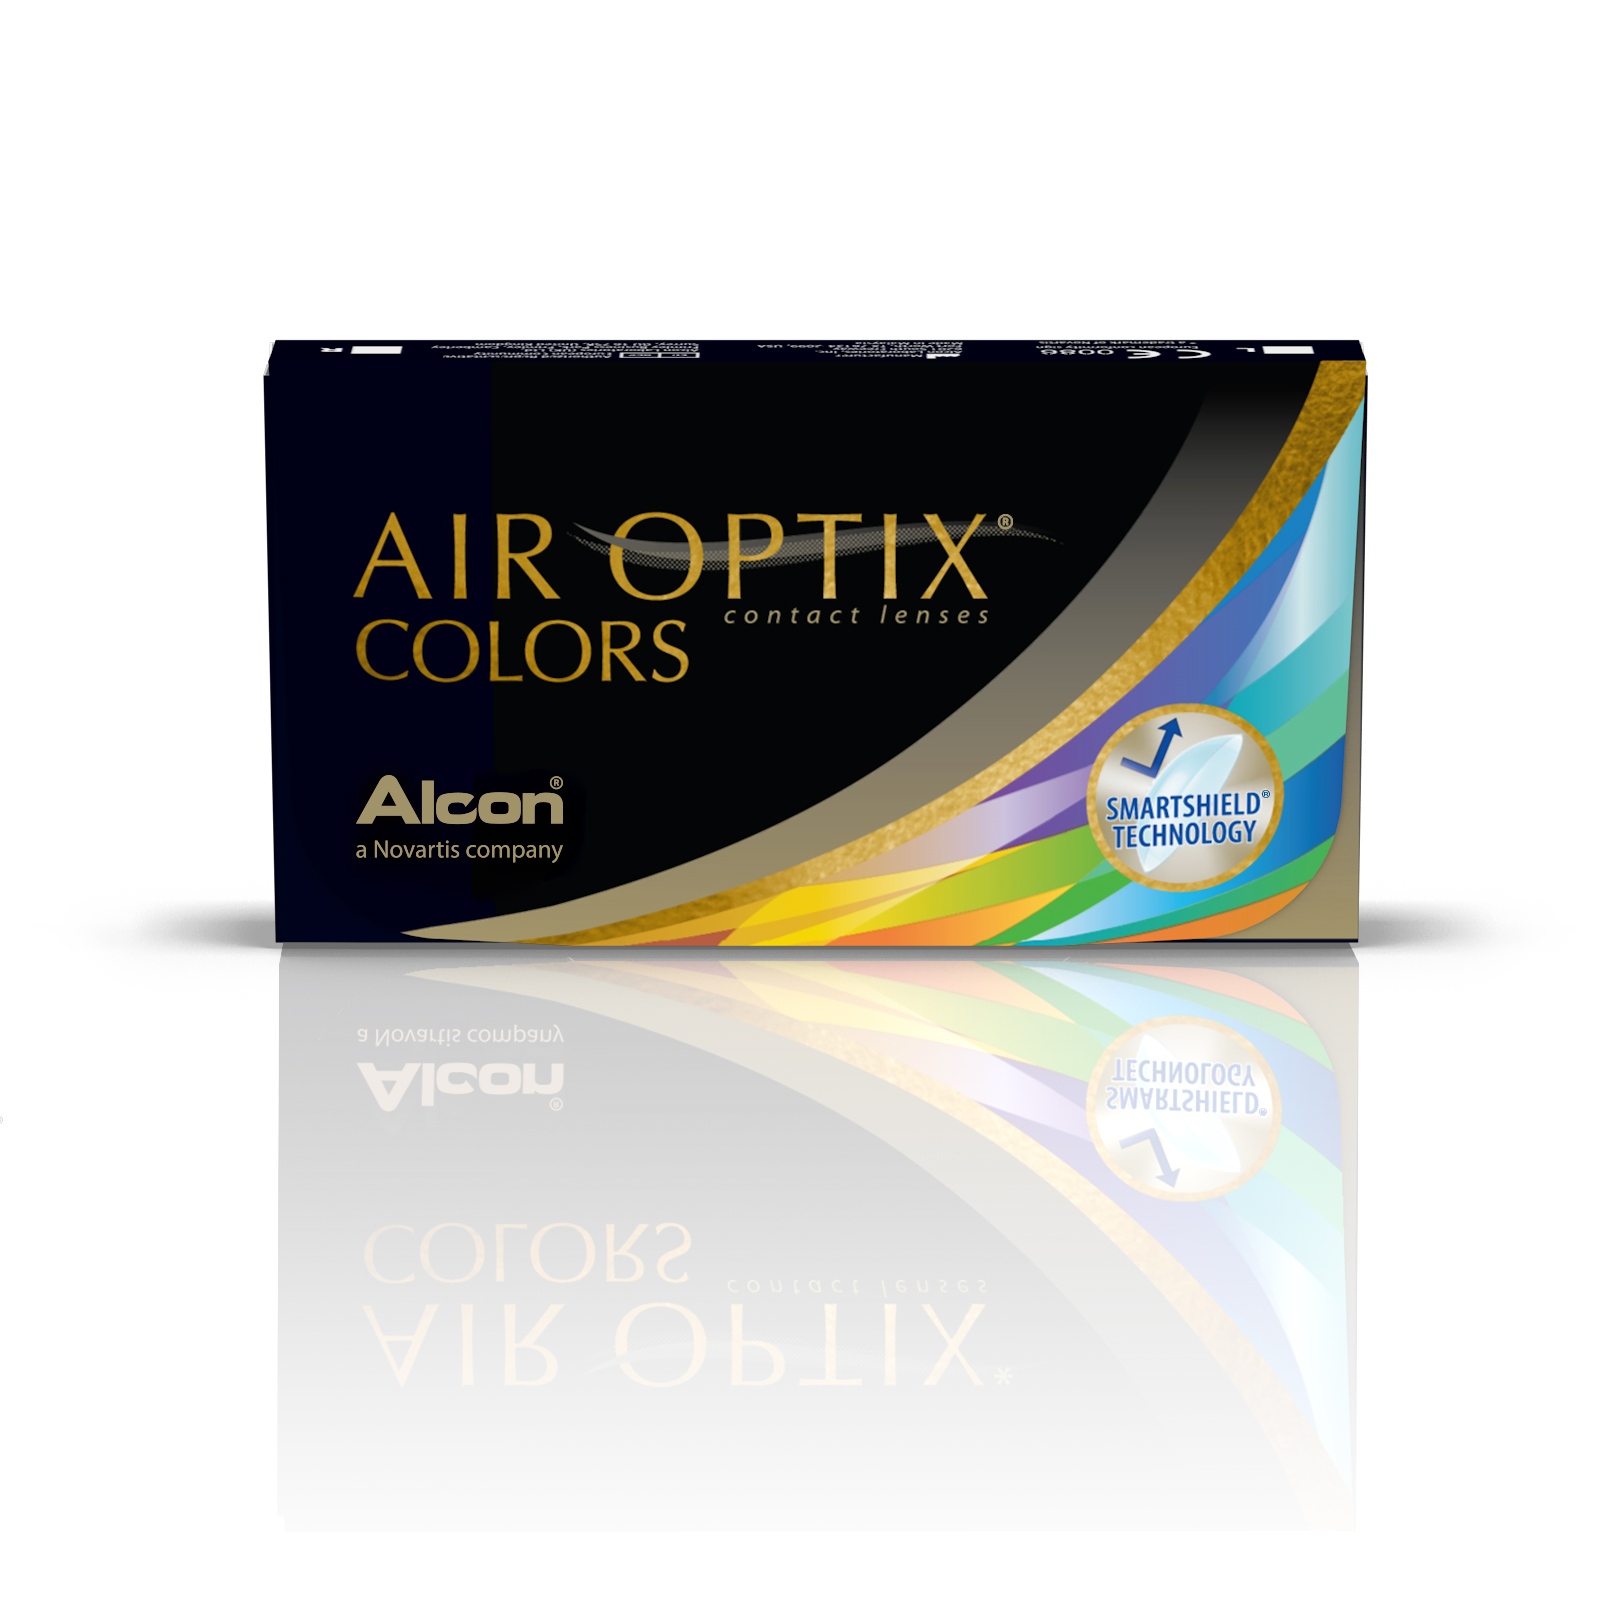 air-optix-colors-contact-lenses-only-83-00-or-less